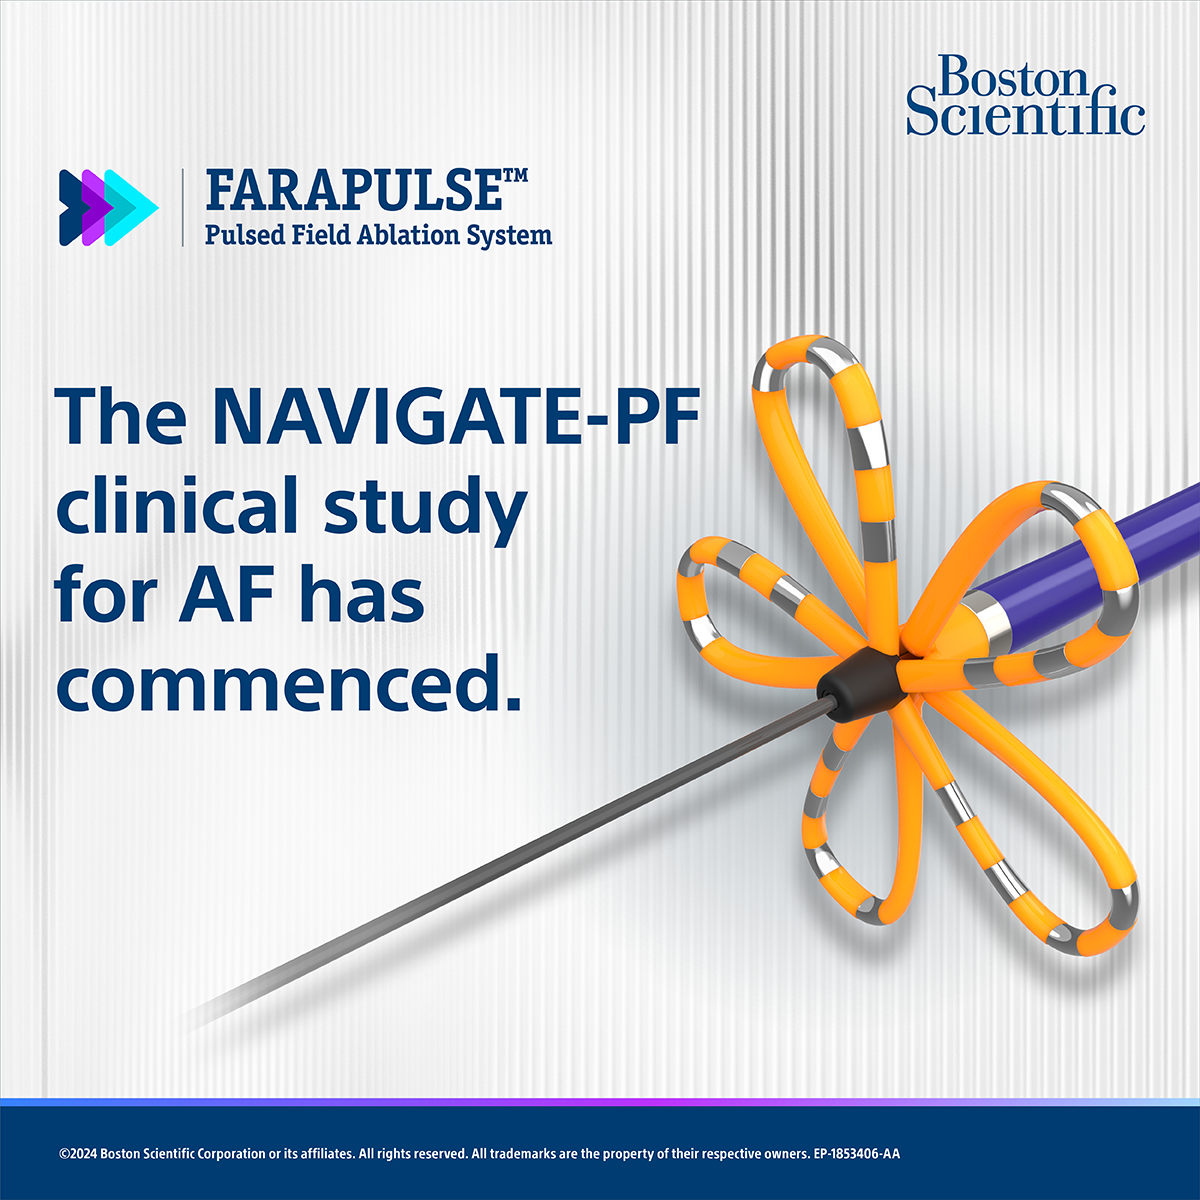 We are excited to announce the initiation of the NAVIGATE-PF clinical study. This study looks to expand the capabilities of FARAPULSE™ with the FARAVIEW™ Software Module, for nav-enabled integration of FARAWAVE™ into our mapping system. Learn more: bit.ly/3Ujpc7f